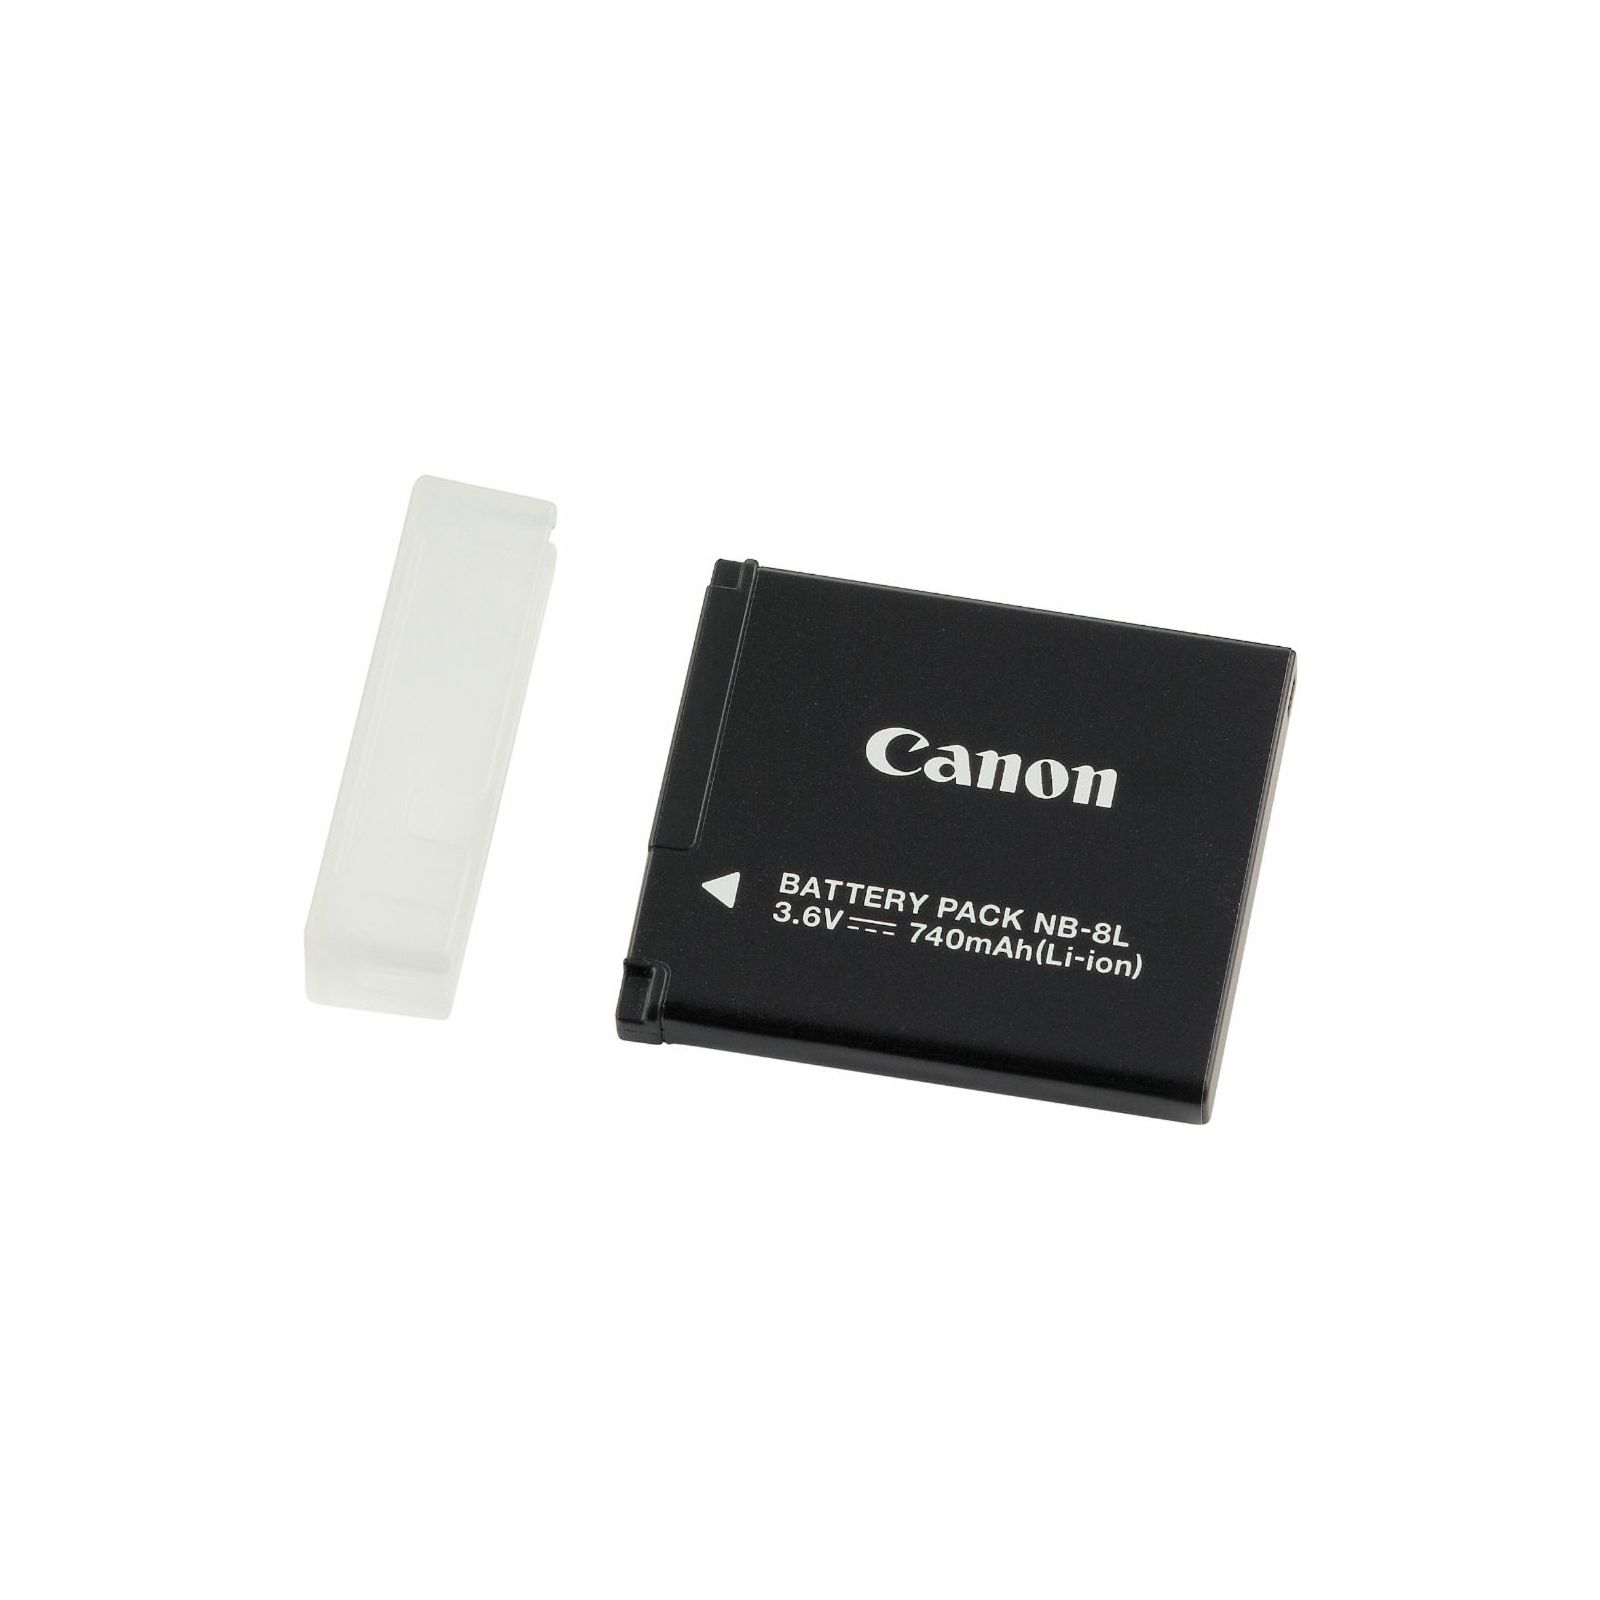 Canon NB-8L baterija za Powershot A2200, A3100 IS, A3000 IS, A3200, A330 Lithium-Ion Battery Pack 4267B001AA